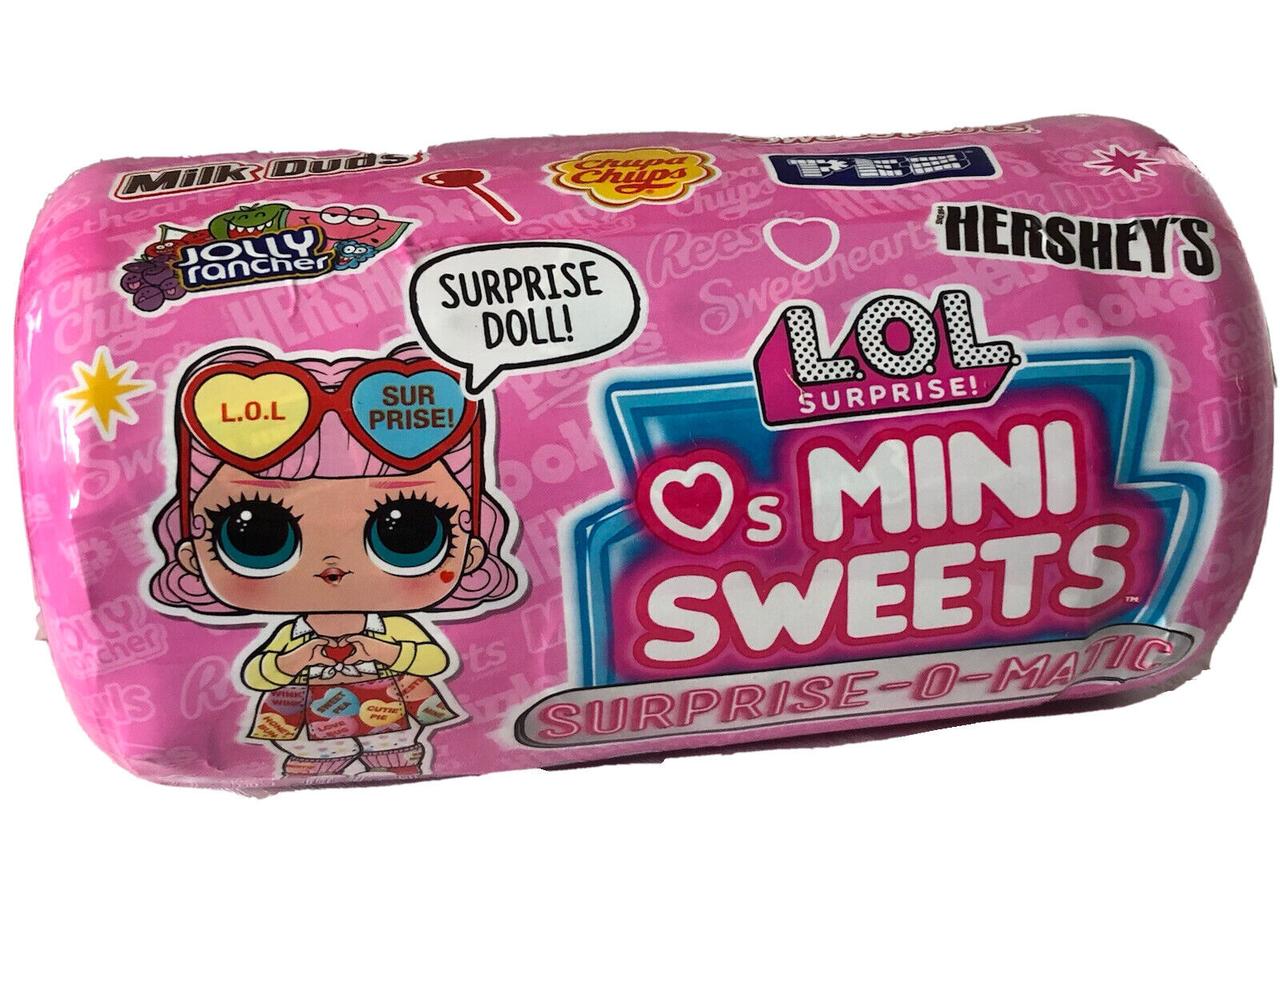 КУКЛЫ LOL SURPRISE LOVES MINI SWEETS SURPRISE-O-MATIC